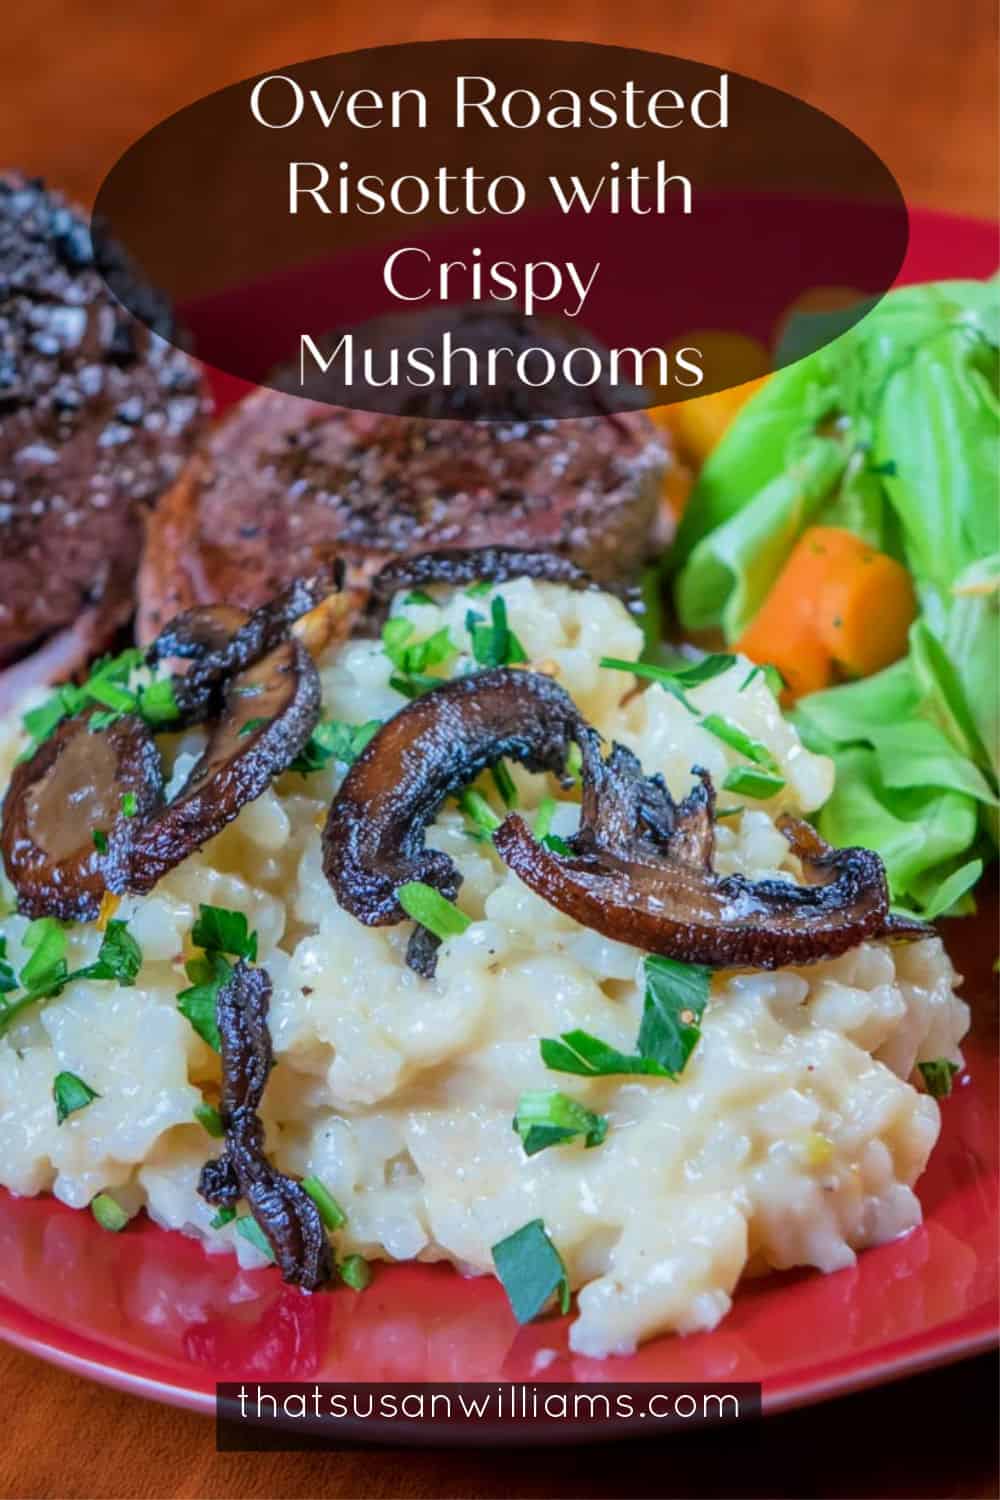 Oven Baked Risotto with Crispy Mushrooms